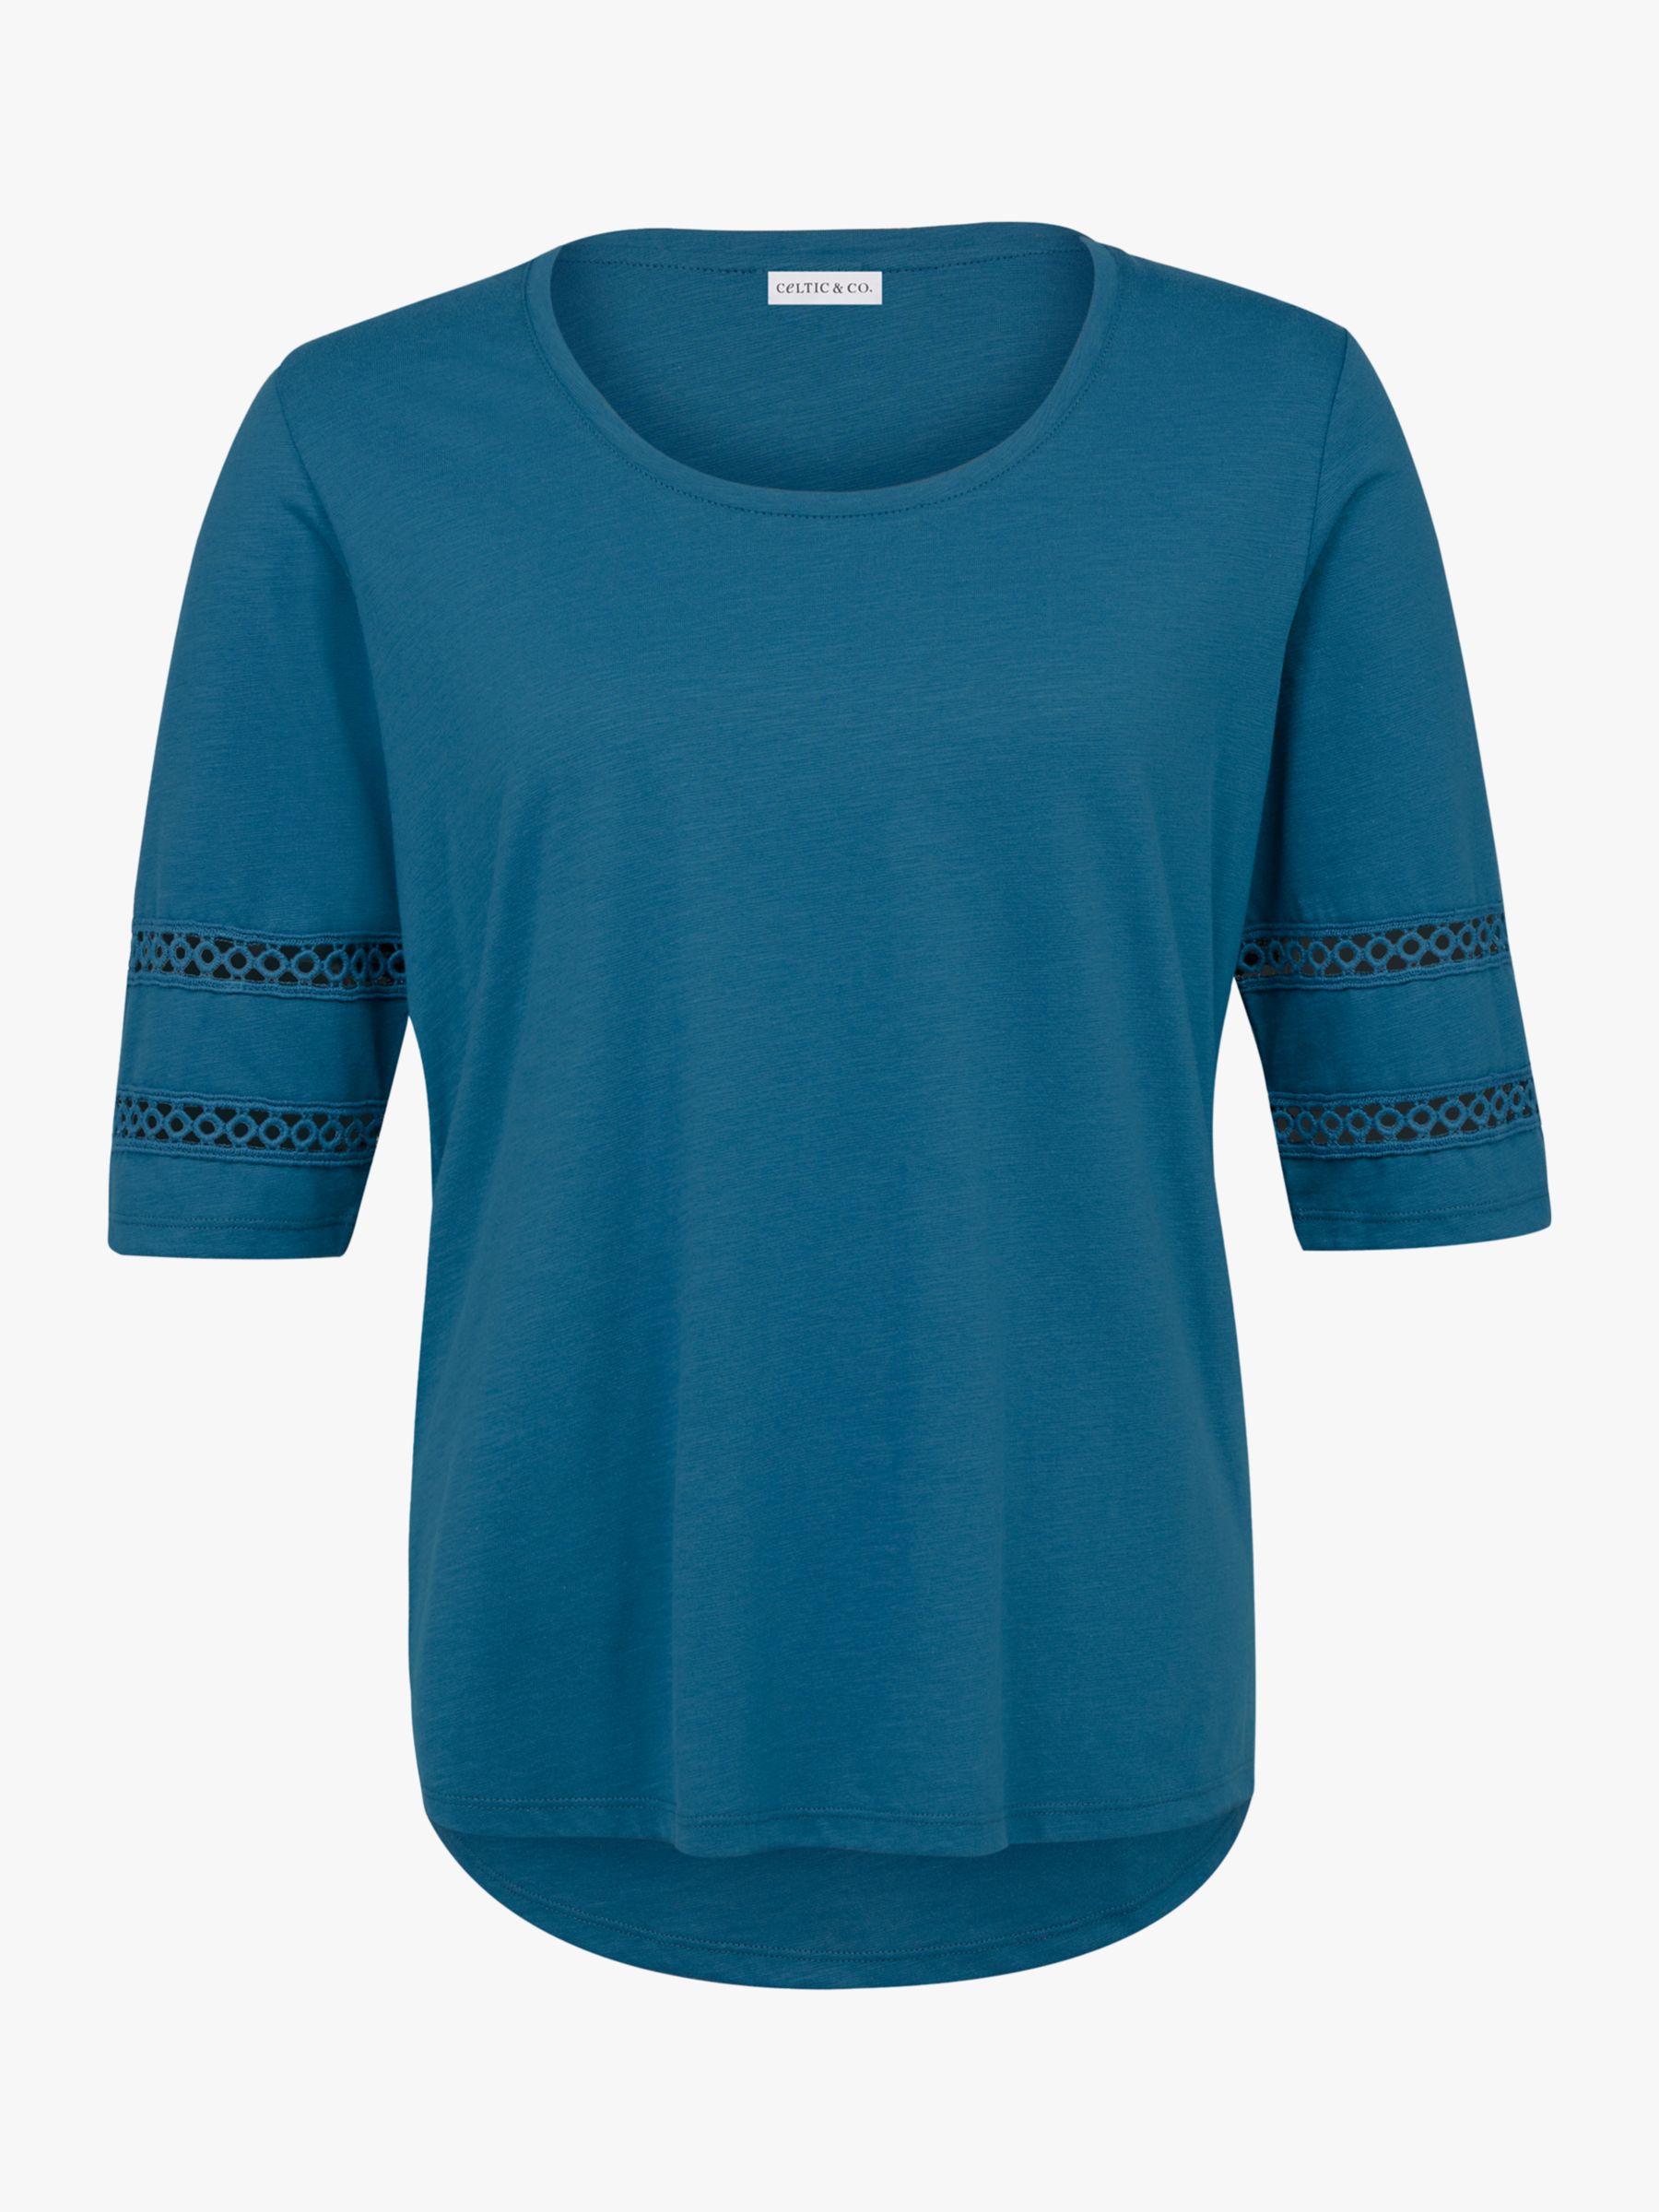 Buy Celtic & Co. Organic Cotton Sleeve Detail Jersey Top Online at johnlewis.com